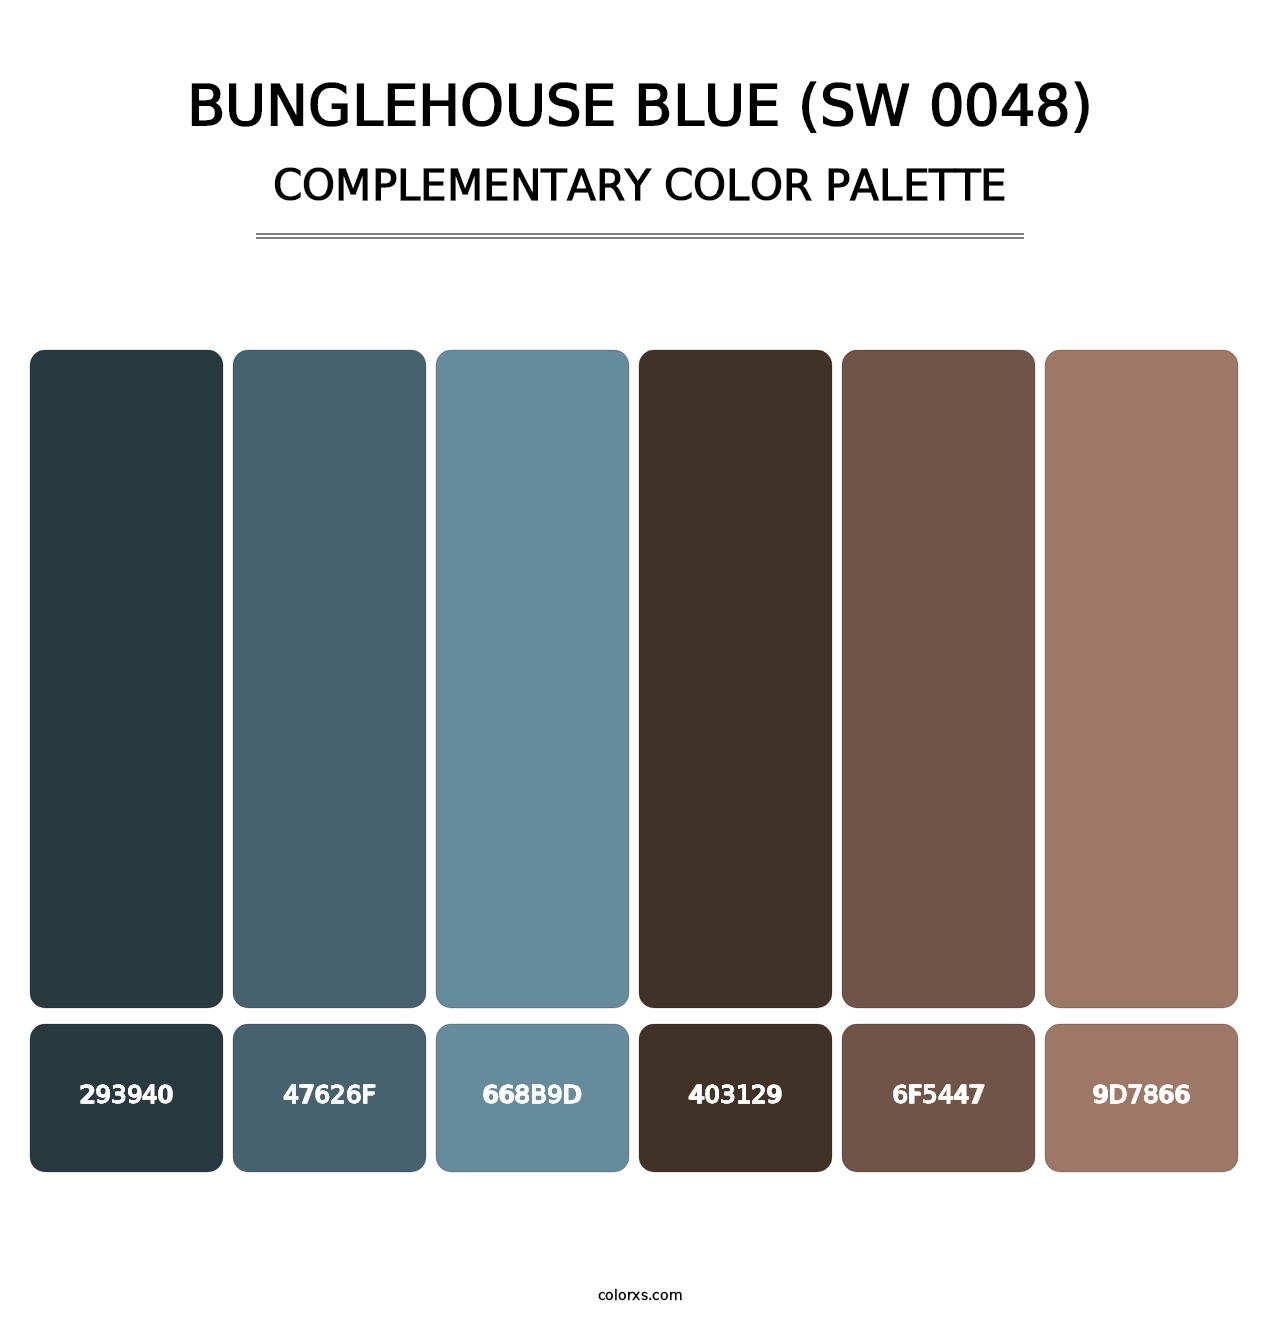 Bunglehouse Blue (SW 0048) - Complementary Color Palette